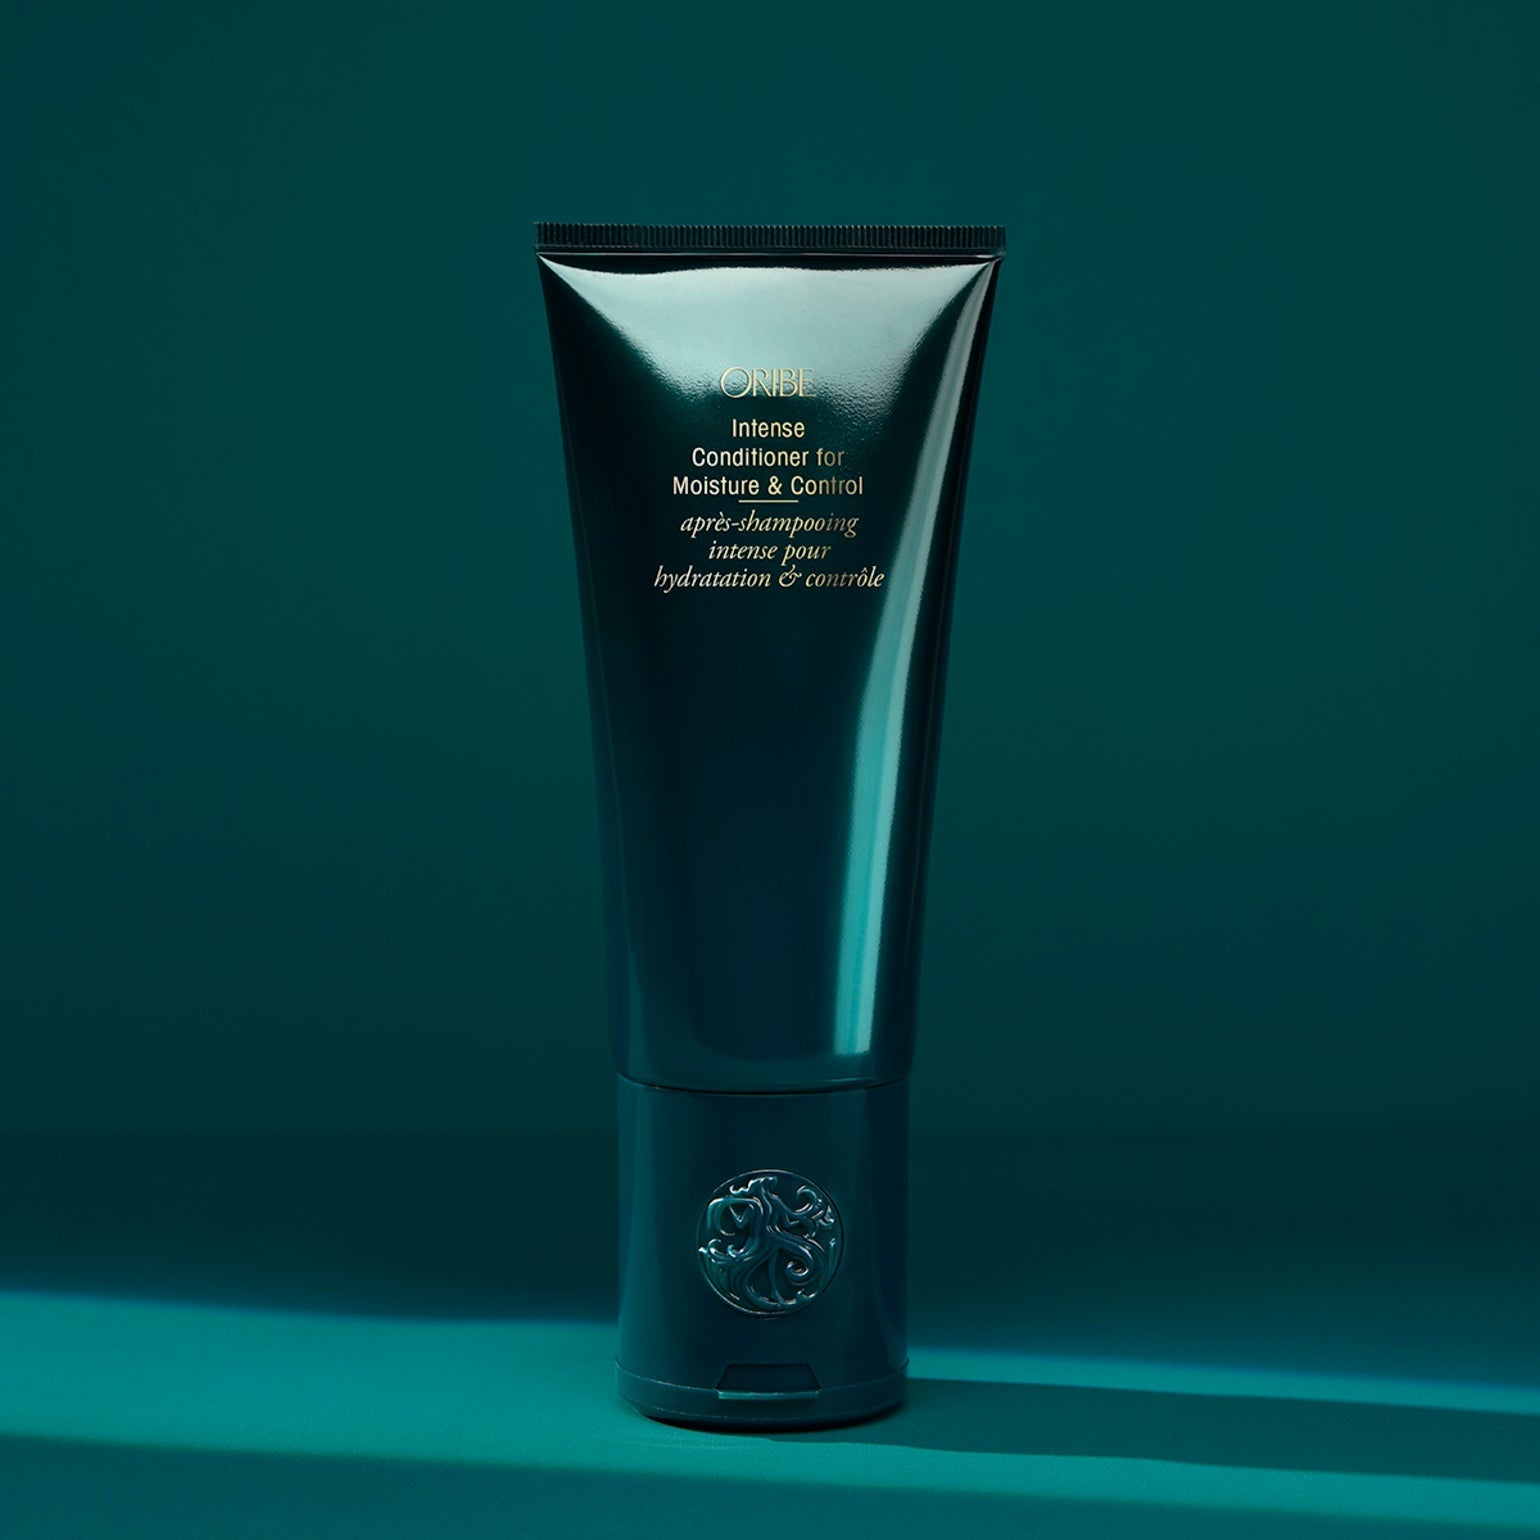 Intense Conditioner for Moisture & Control - Oribe Hair Care